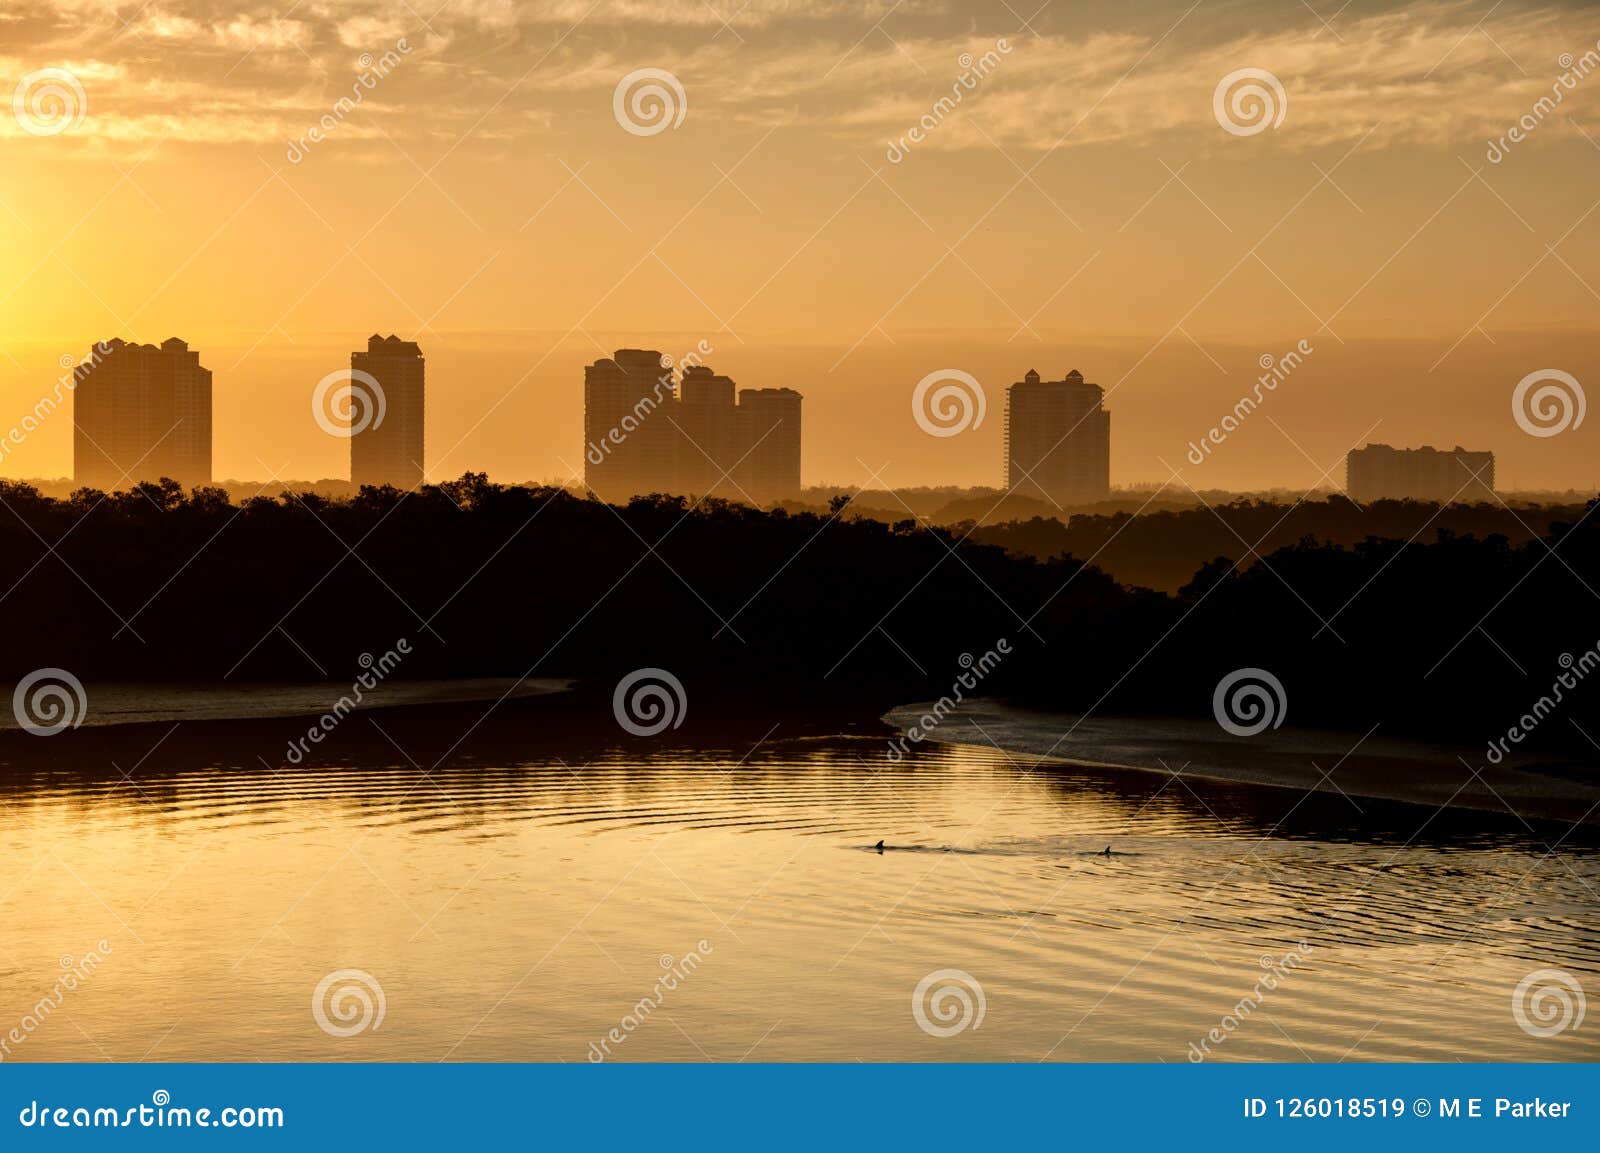 dolphins swim beneath highrises in the hazy light of a golden sunrise.